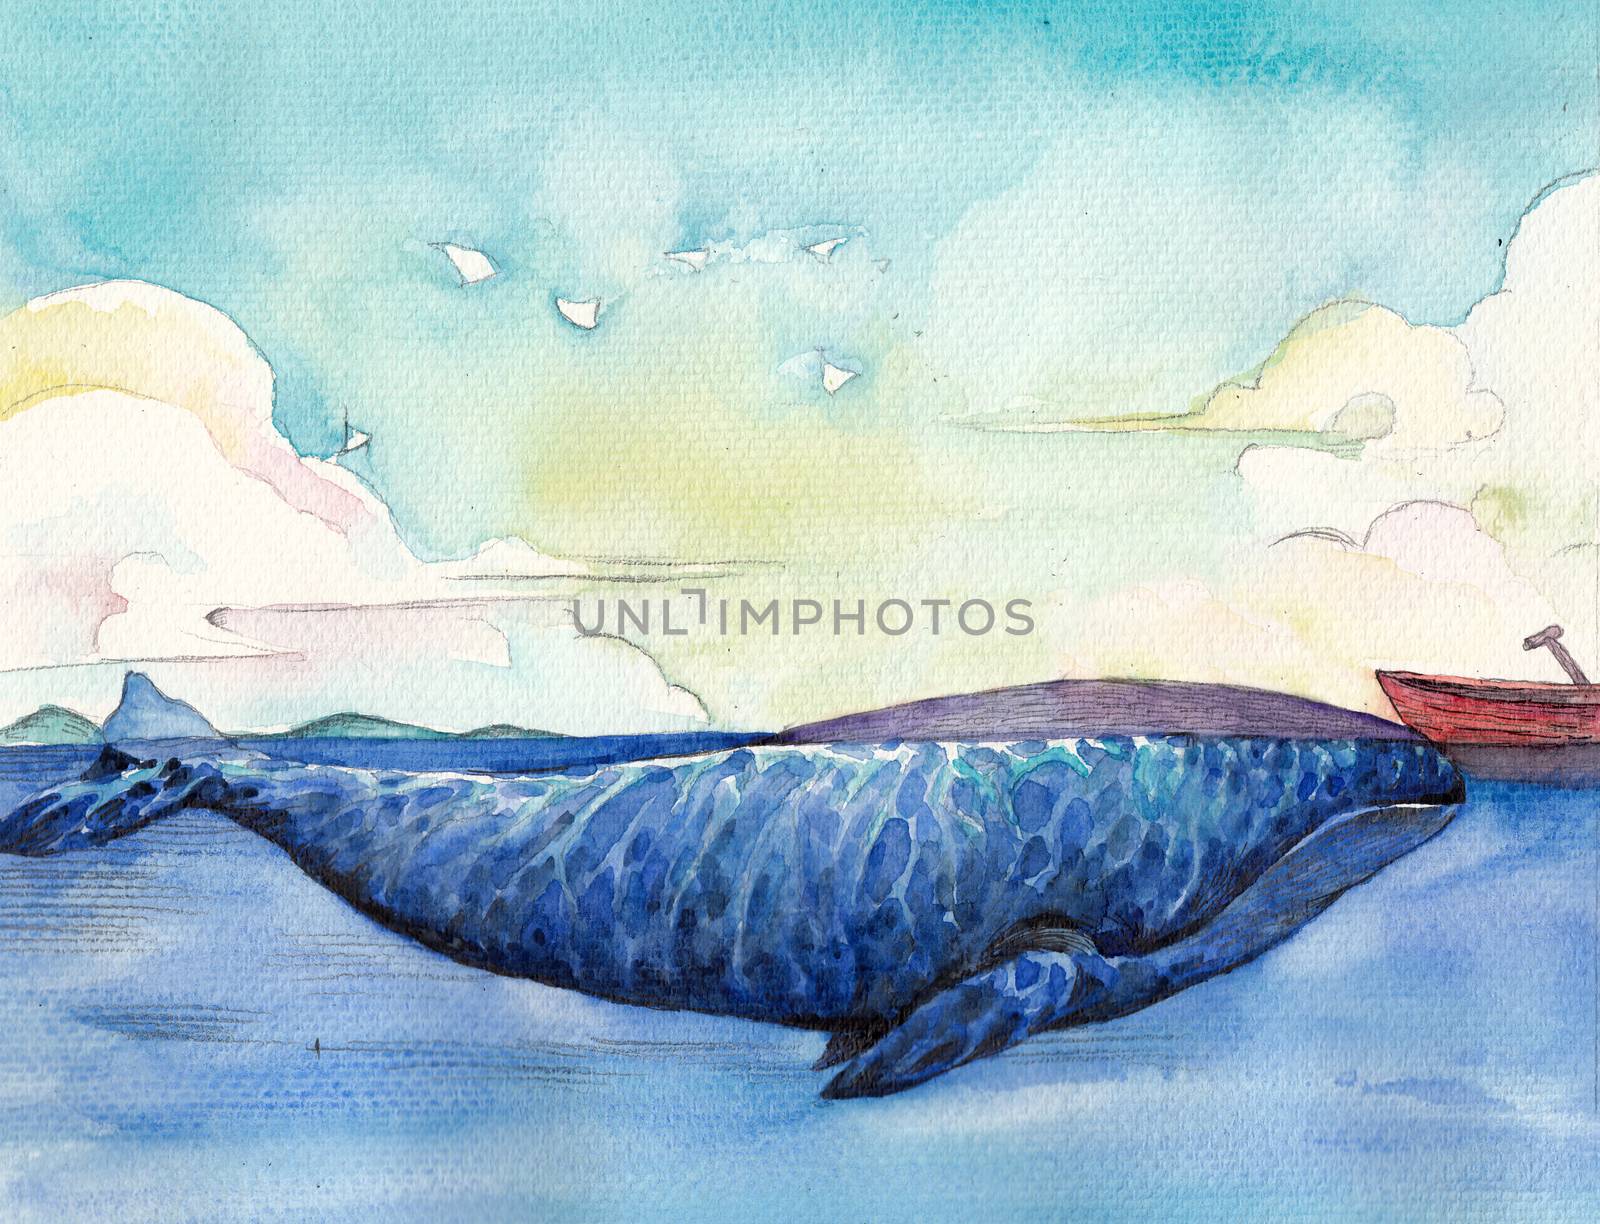 Watercolor High Definition Illustration: The Great Whale. Fantastic Cartoon Style Scene Wallpaper Background Design with Story.